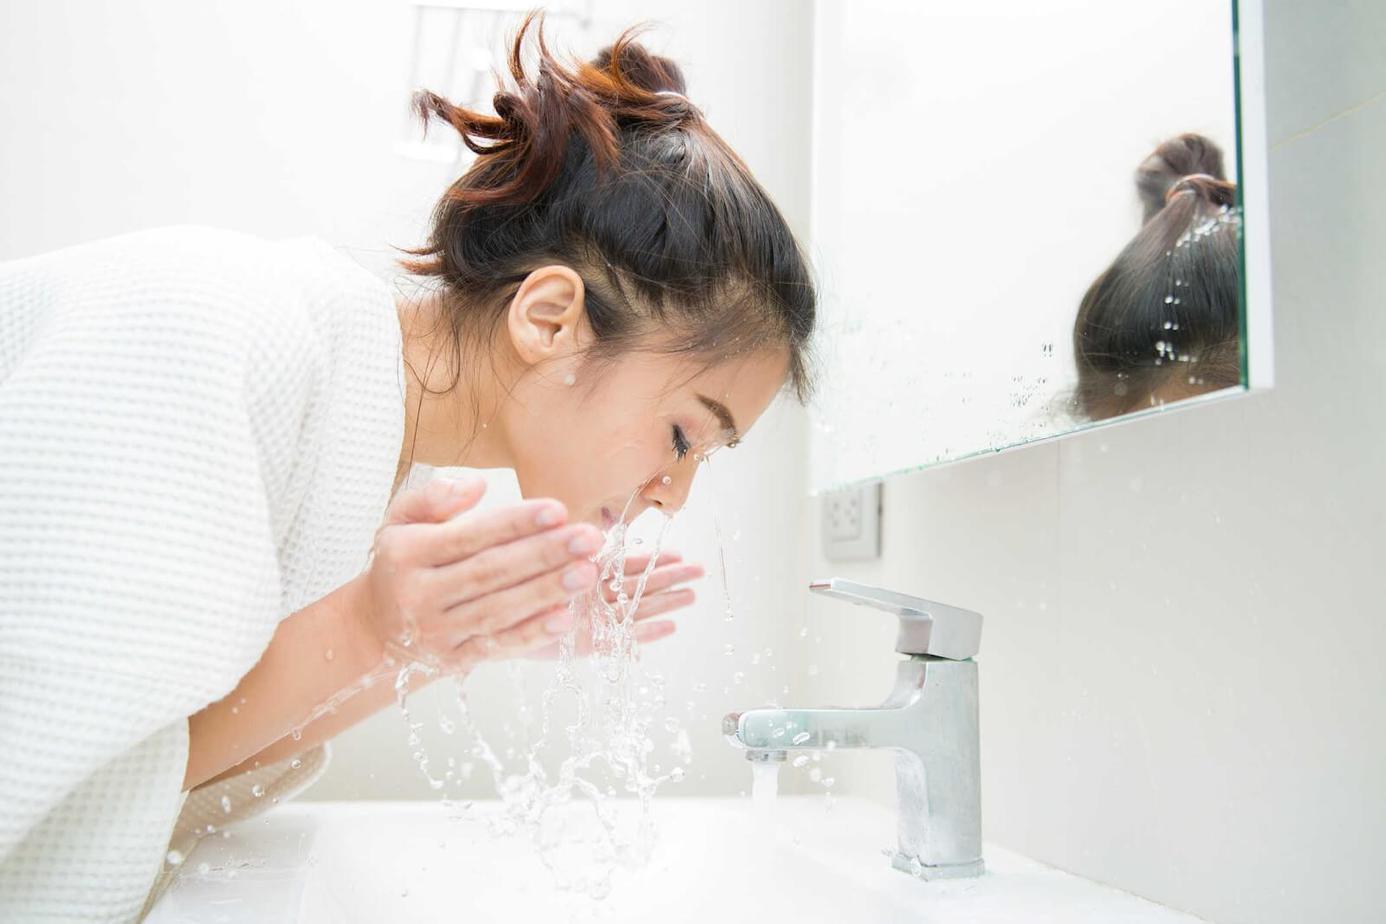 Washing Your Face Properly Is the First Step of Care for Beautiful Skin Proven